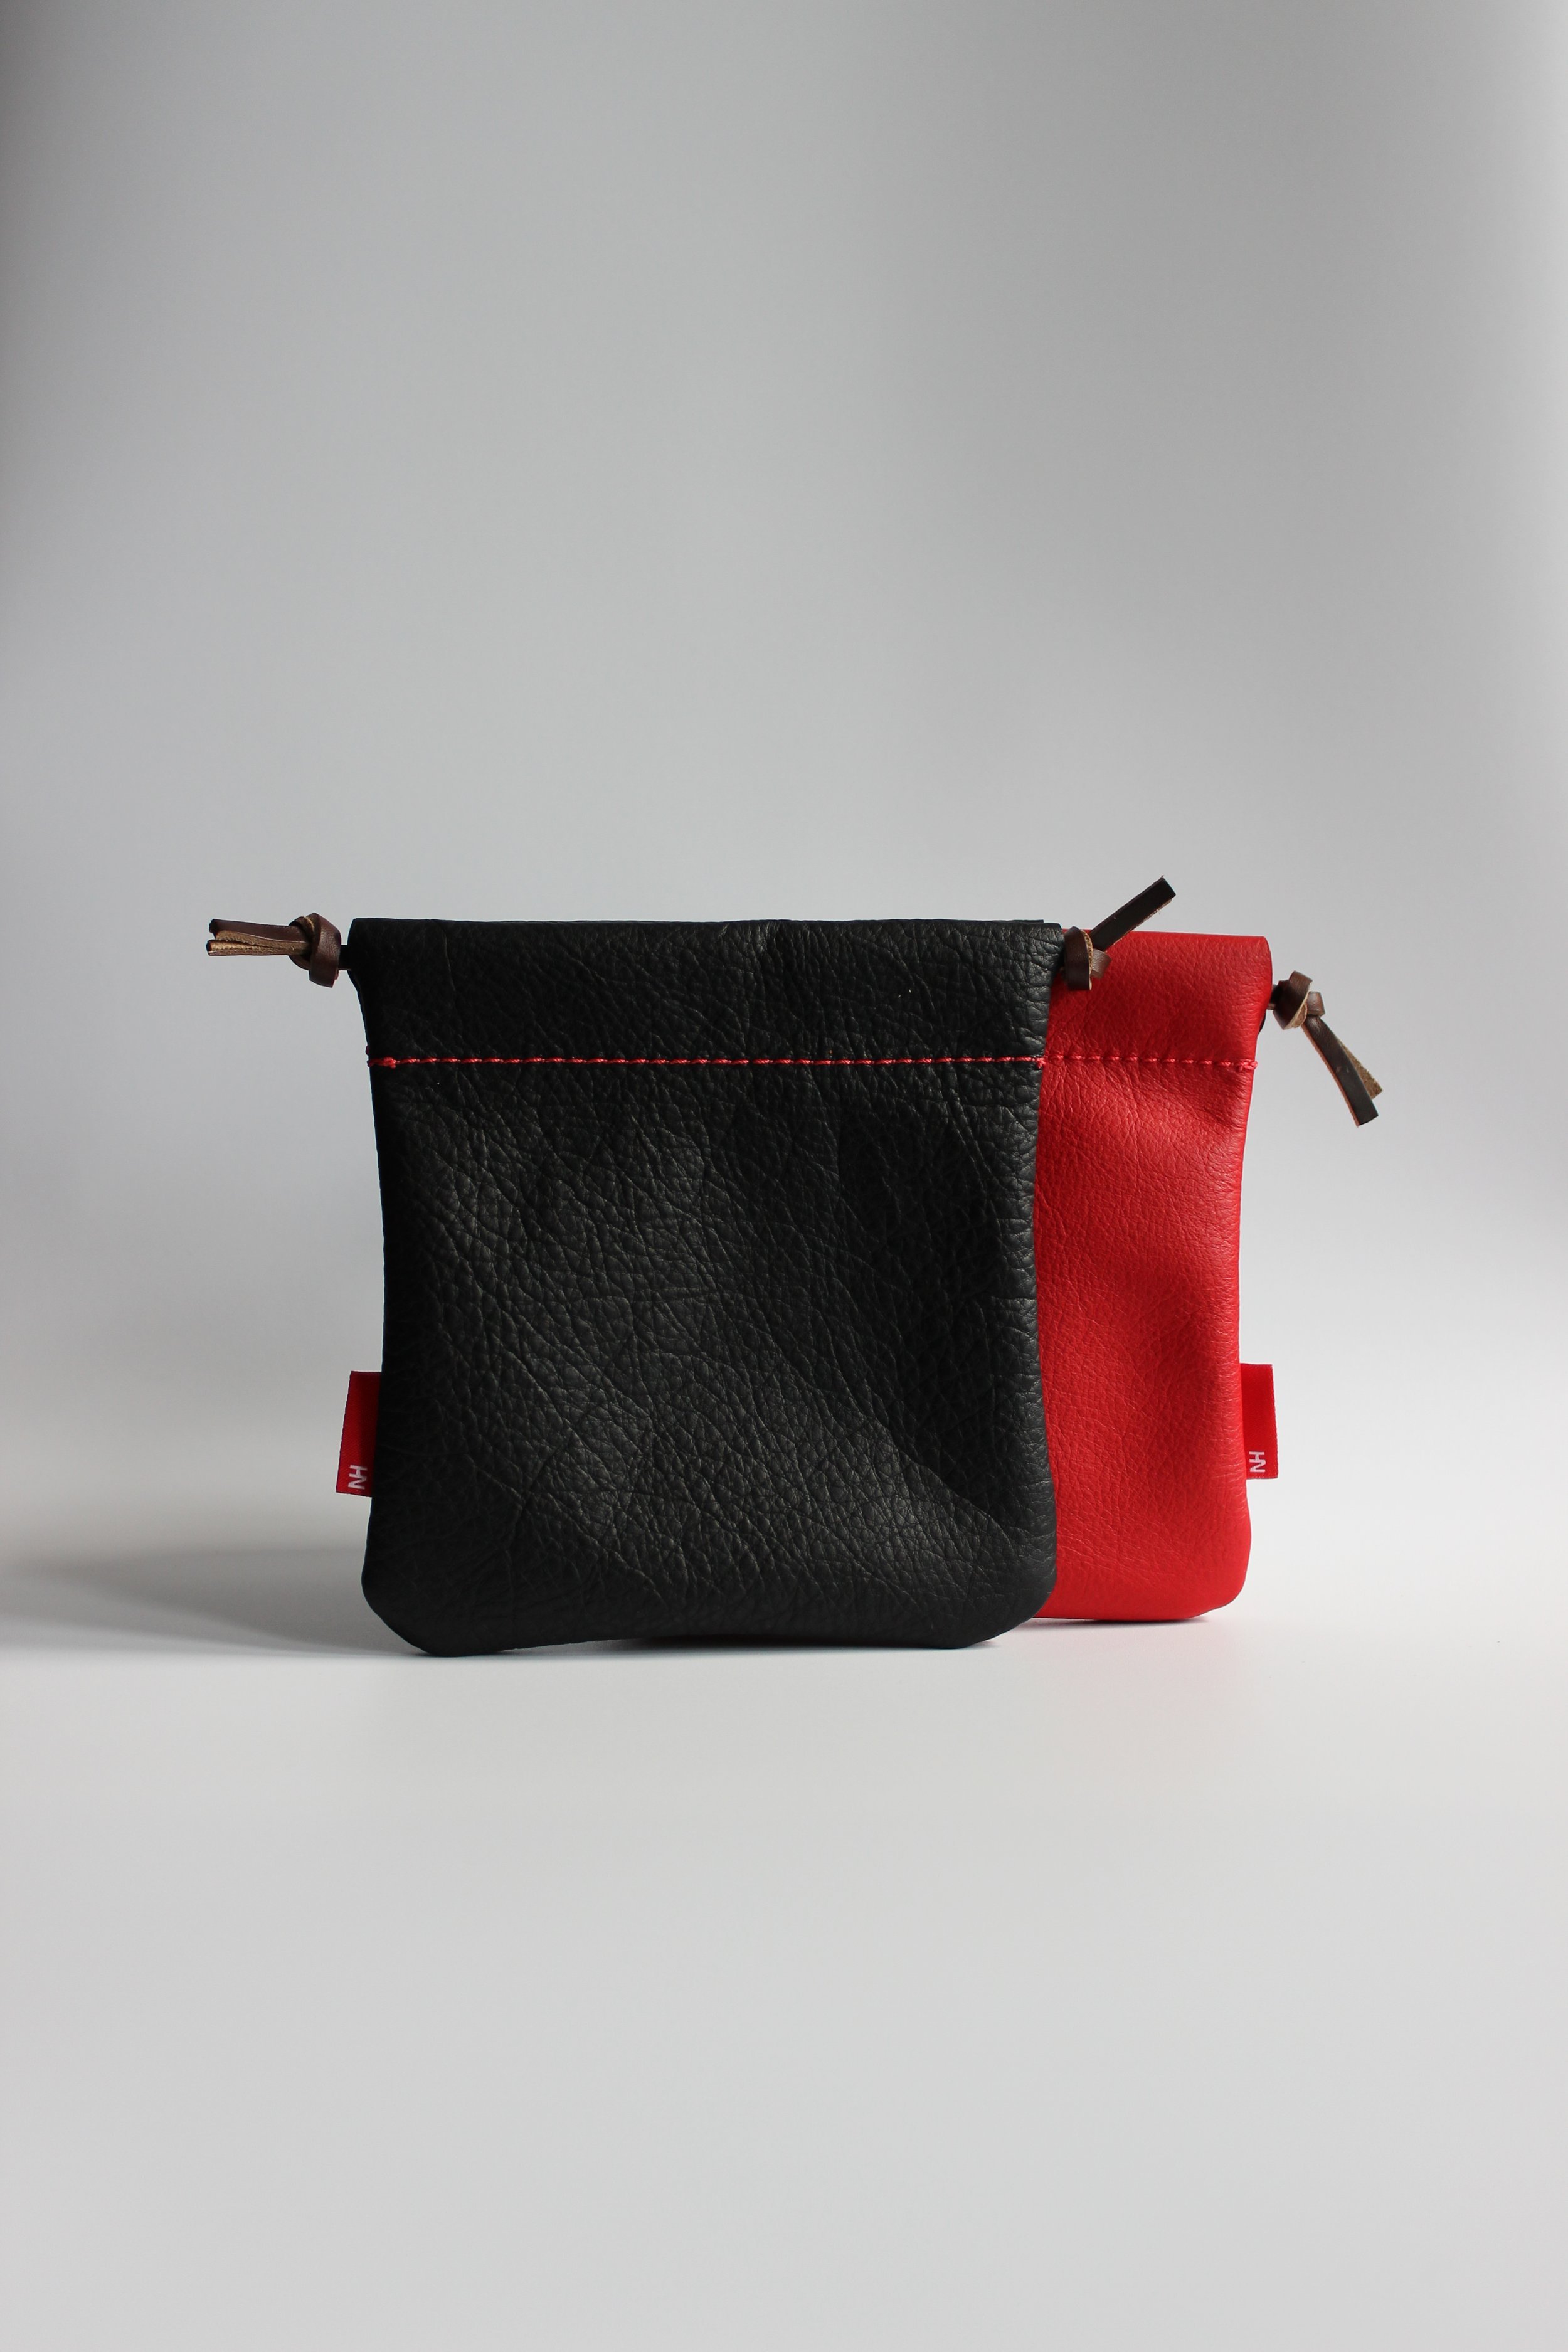 NH Leather Valuables Pouch – $48+